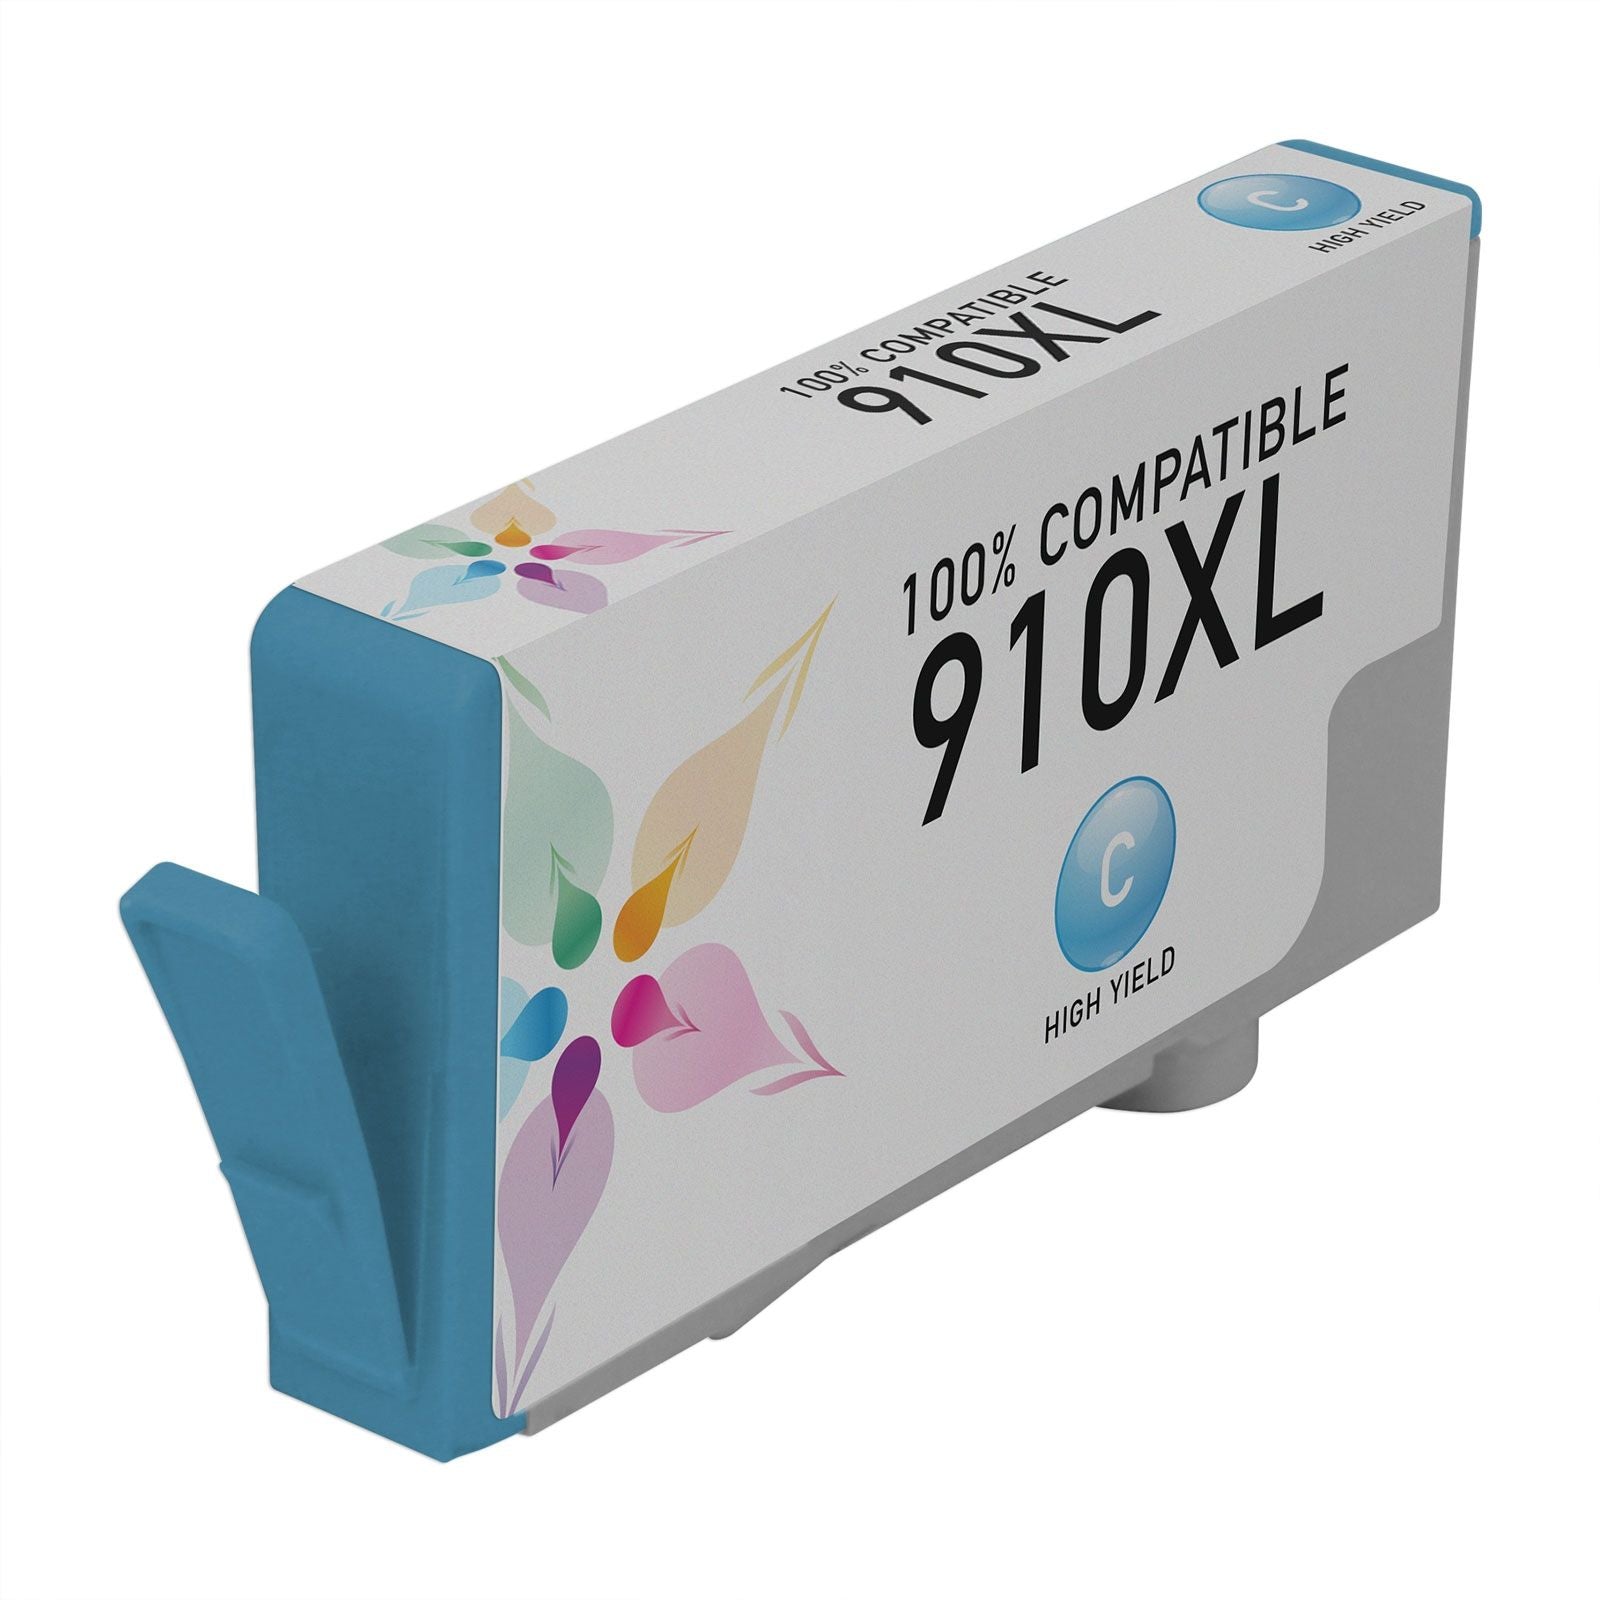 IMPERIAL BRAND Compatible ink cartridge for HP 910XL CYAN INKJET CRTG